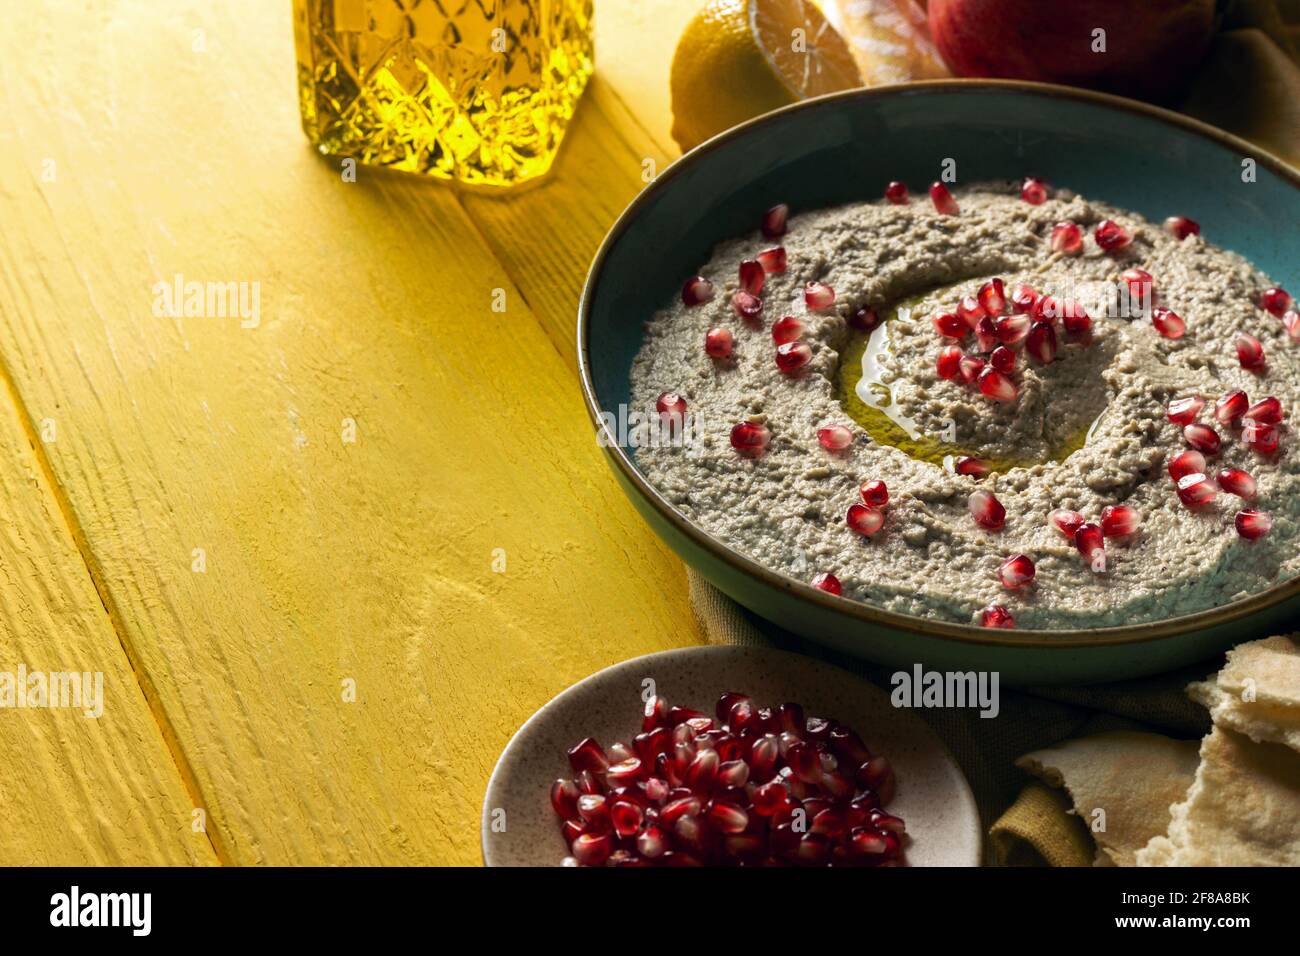 Baba ganoush or mutabal, Middle Eastern eggplant dip sauce garnished with pomegranate seeds, with various ingredients and served in a light blue plate Stock Photo